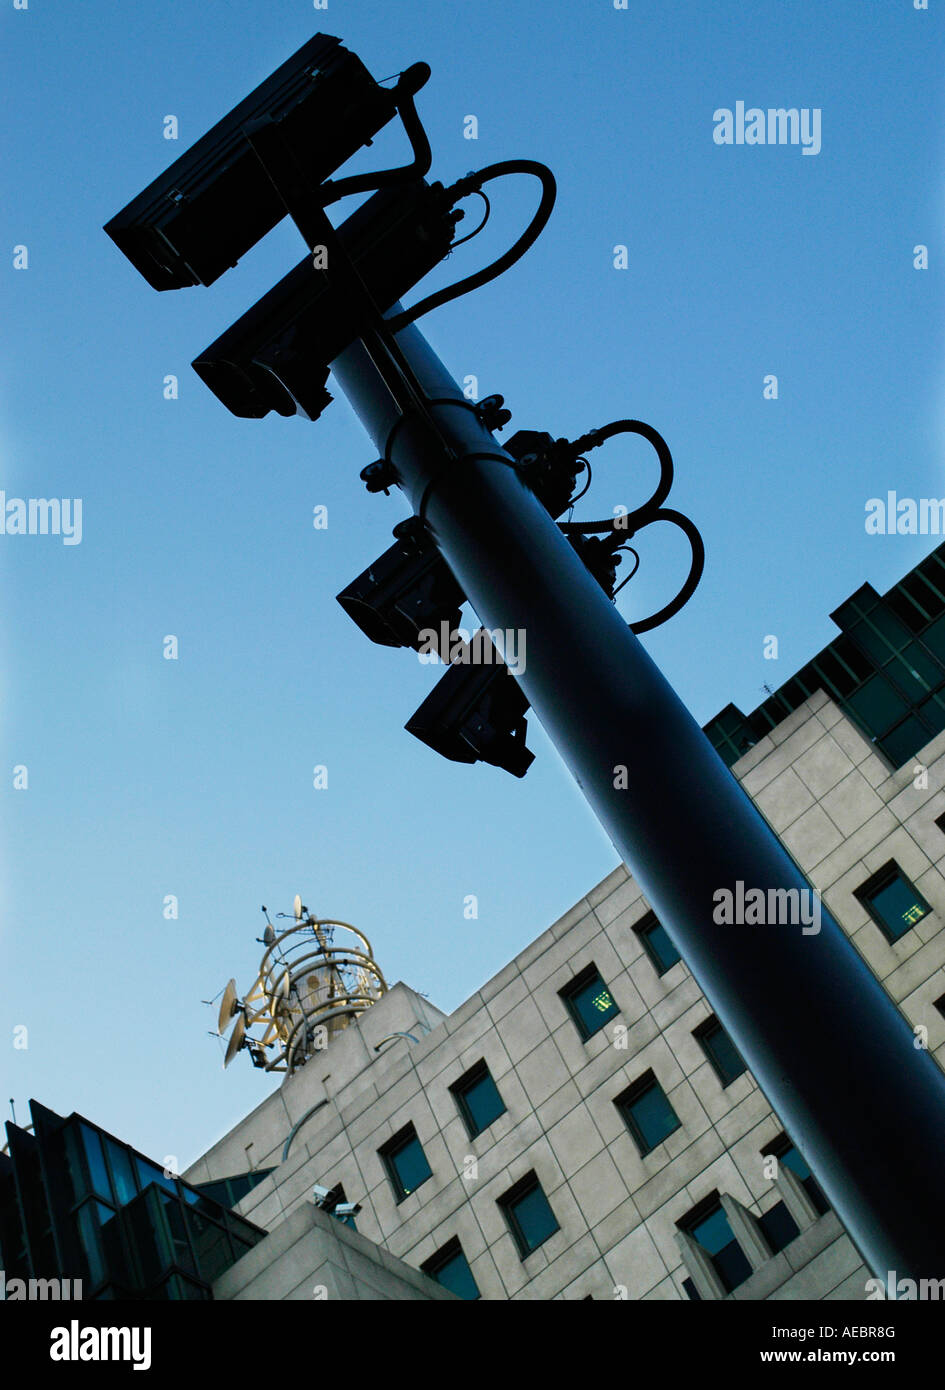 Congestion Charge Camera High Resolution Stock Photography and Images - Alamy